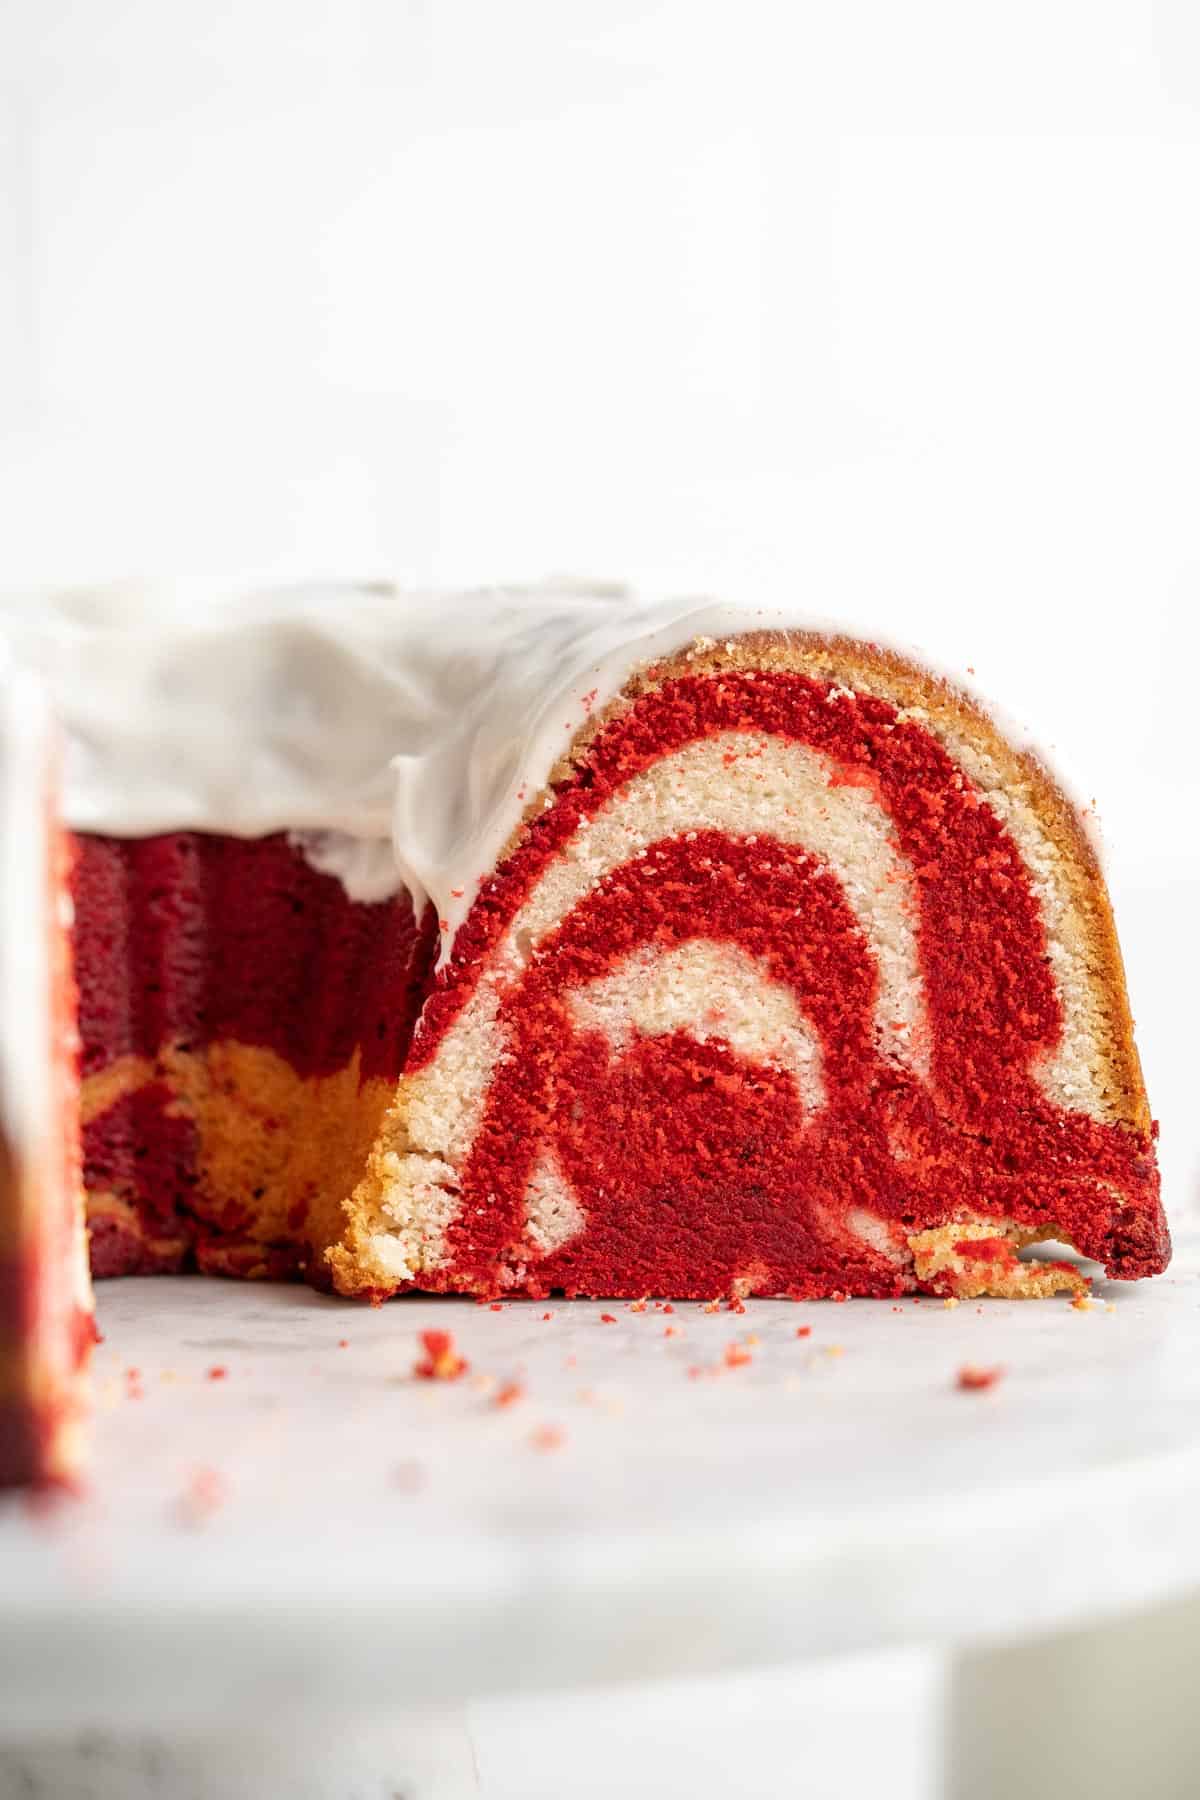 Red velvet swirl cake on a cake pedestal with a cross section cut to show inside of the cake.